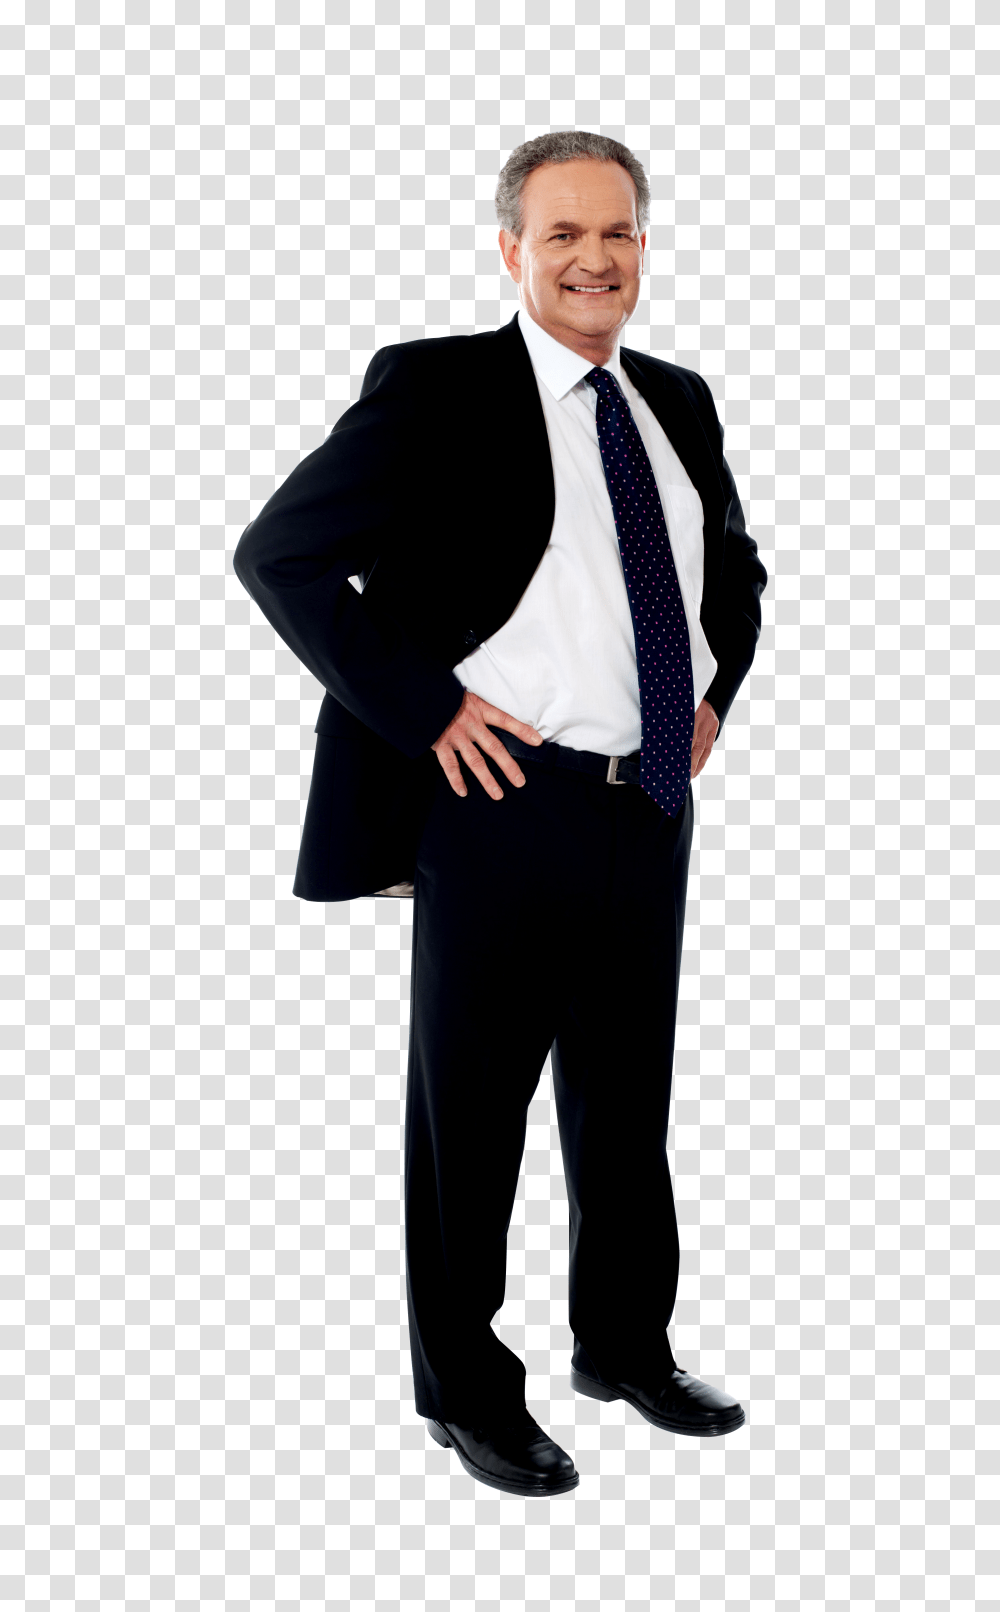 Men In Suit Stock Photo Play, Tie, Accessories, Shirt Transparent Png